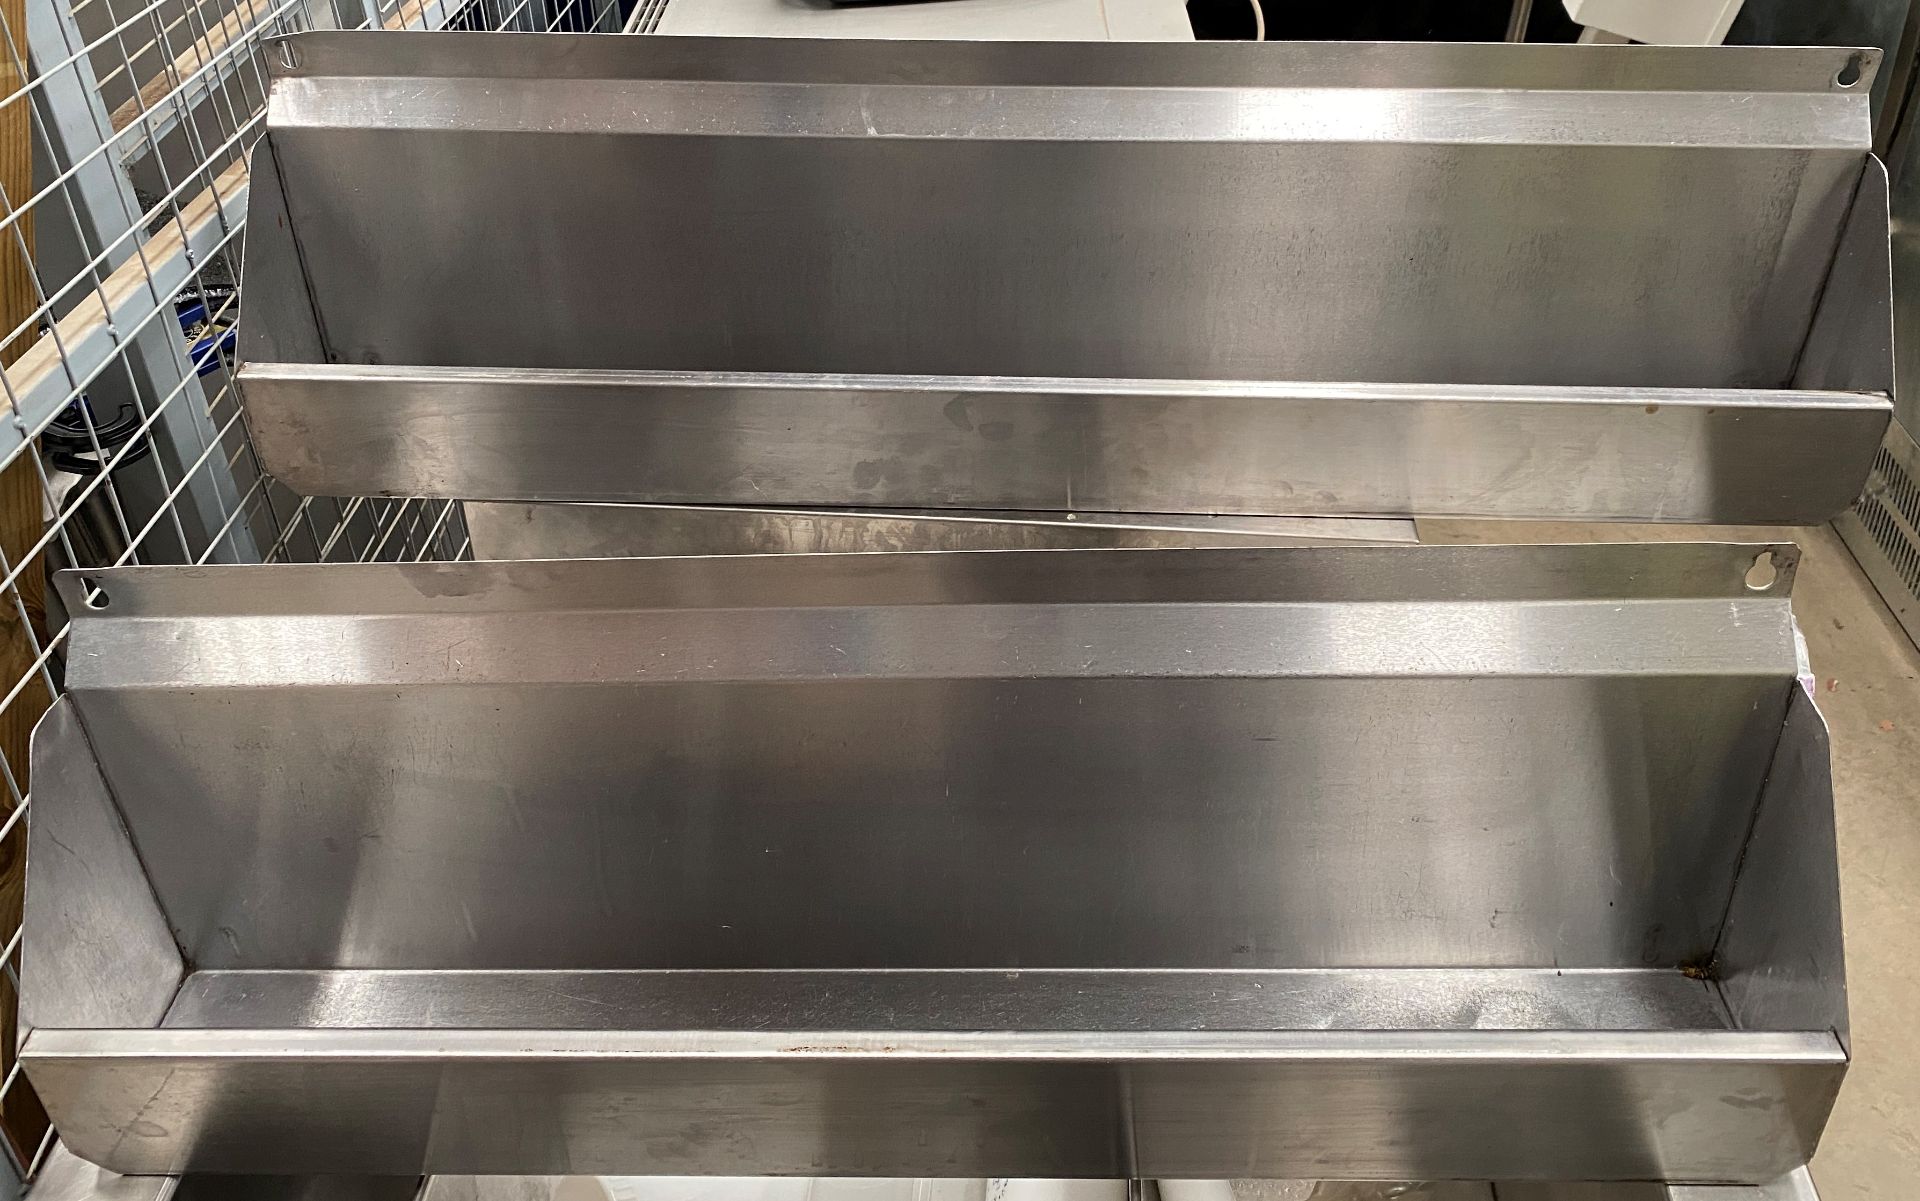 2 x Stainless Steel Wall Mounted Storage Shelves - 81cm and 100cm long respectively - Image 2 of 3